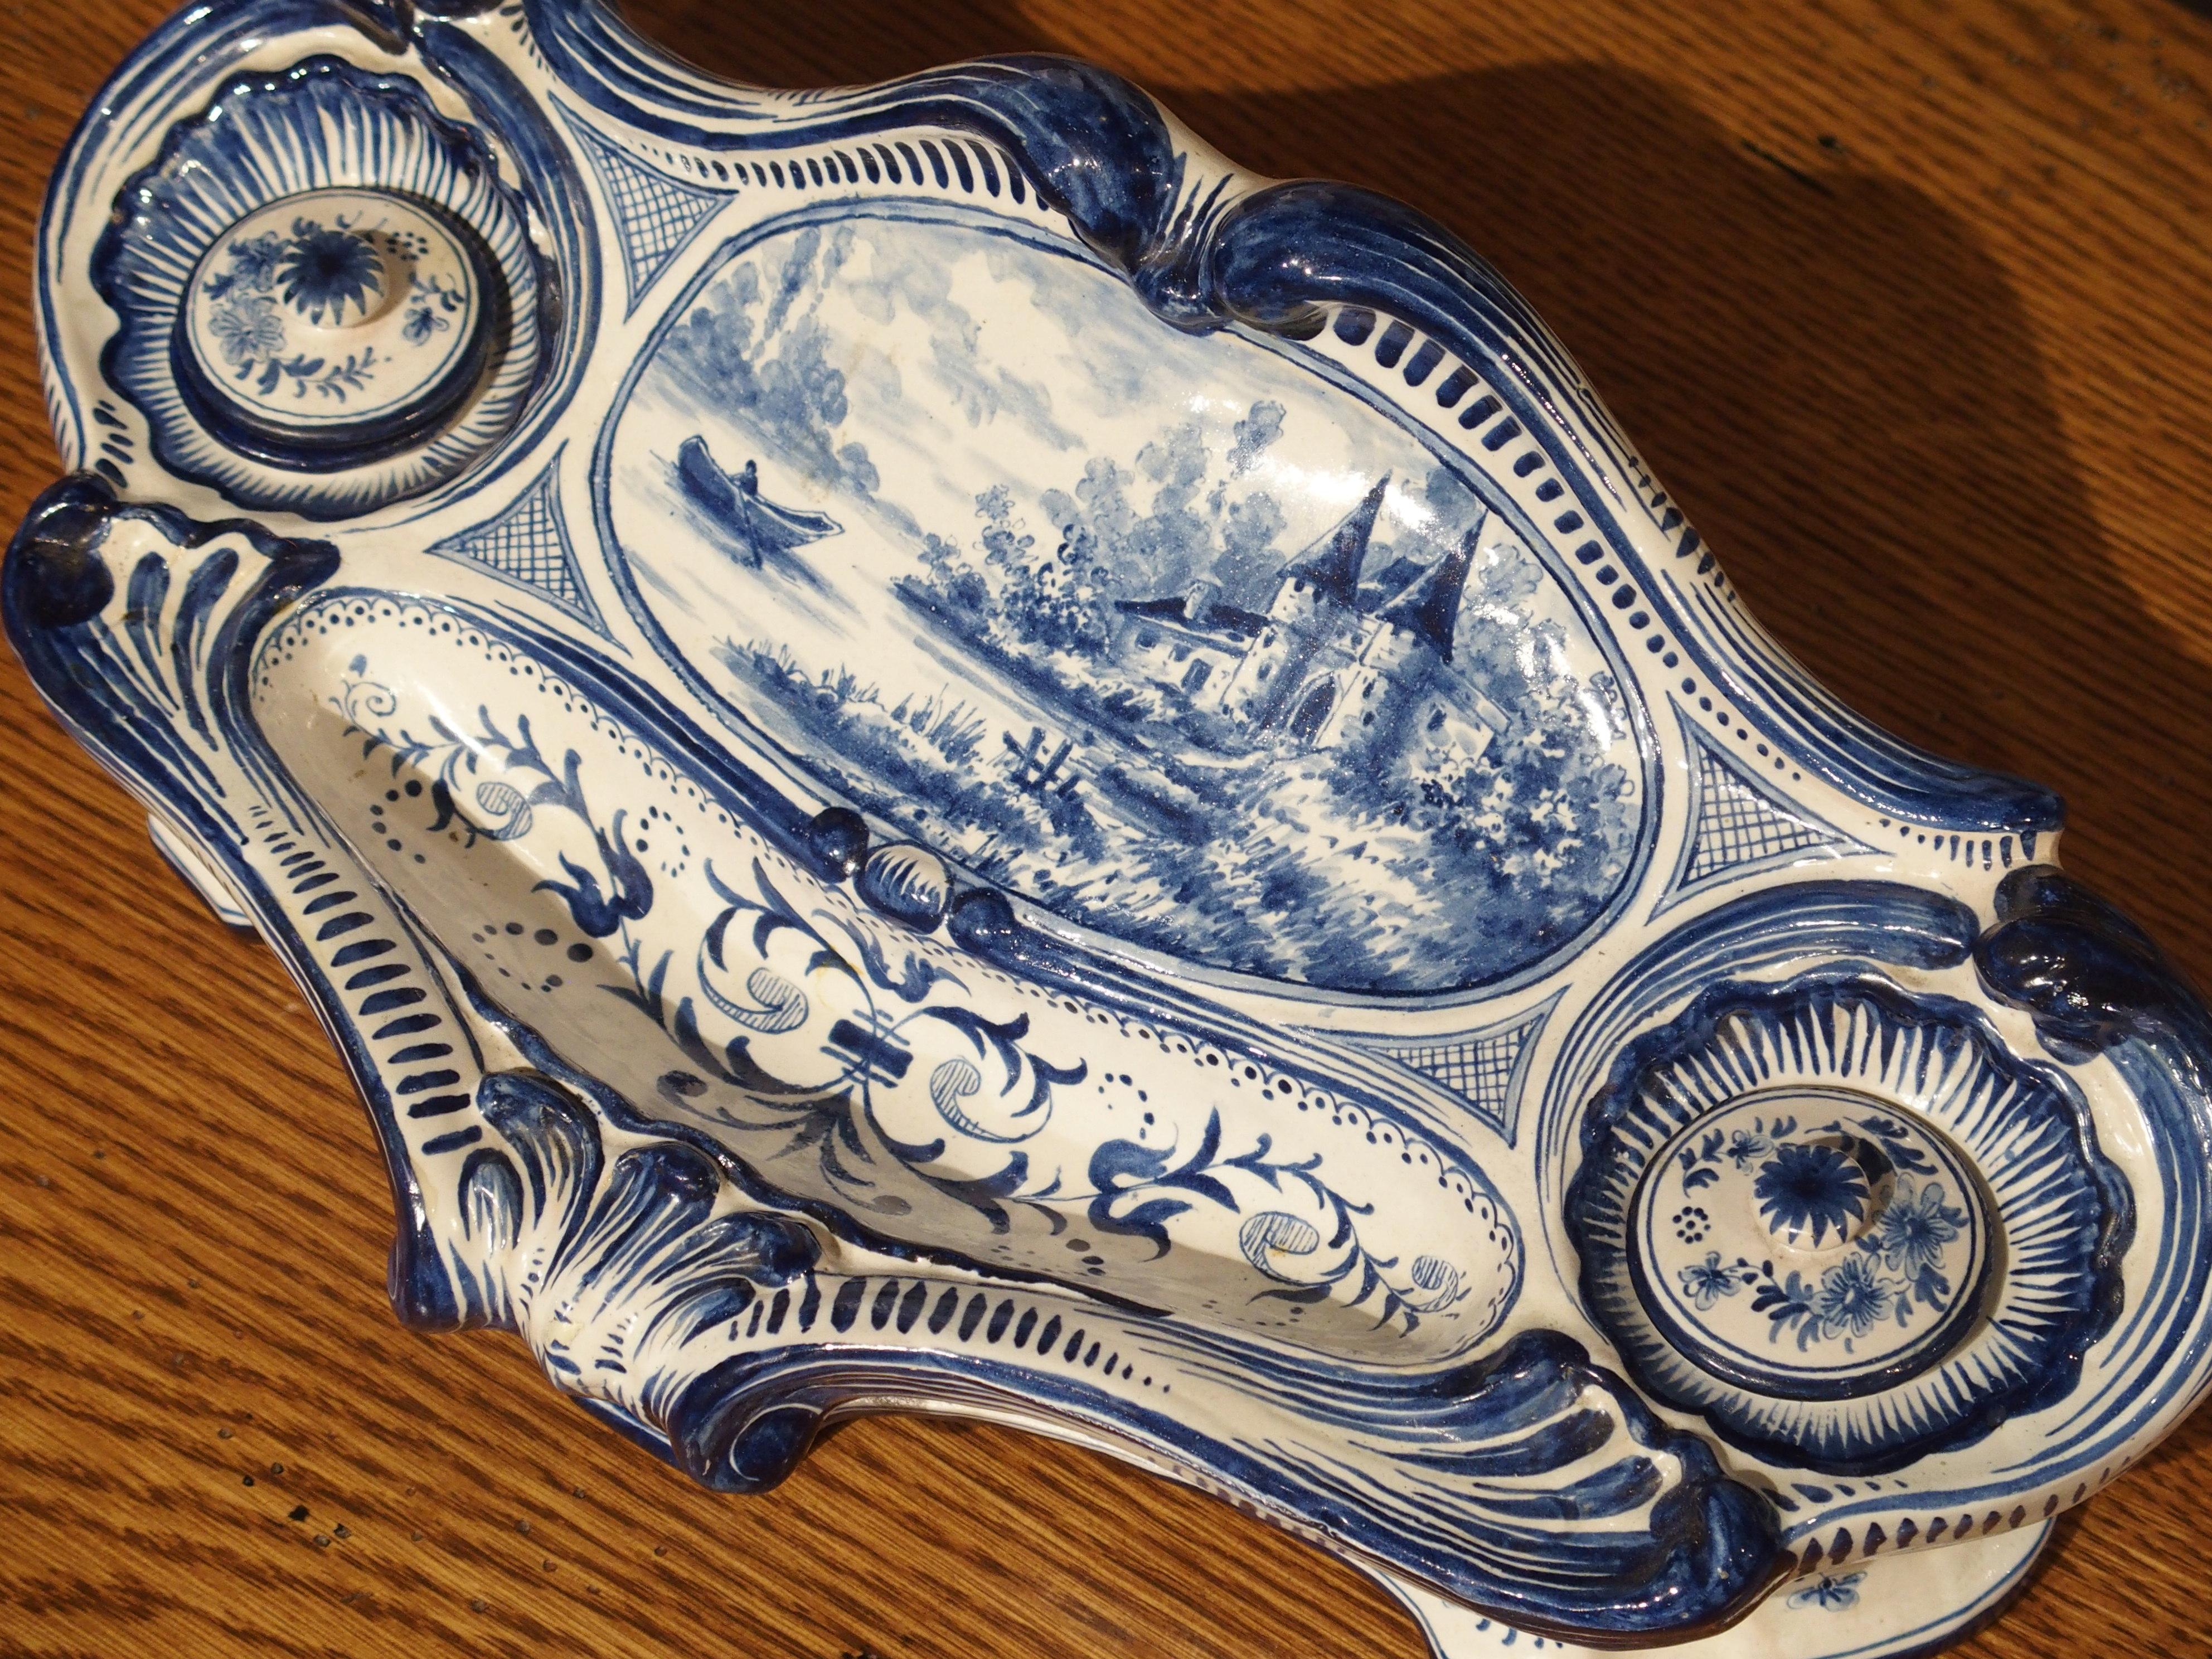 Ceramic Antique French Blue and White Faience Inkwell, circa 1900